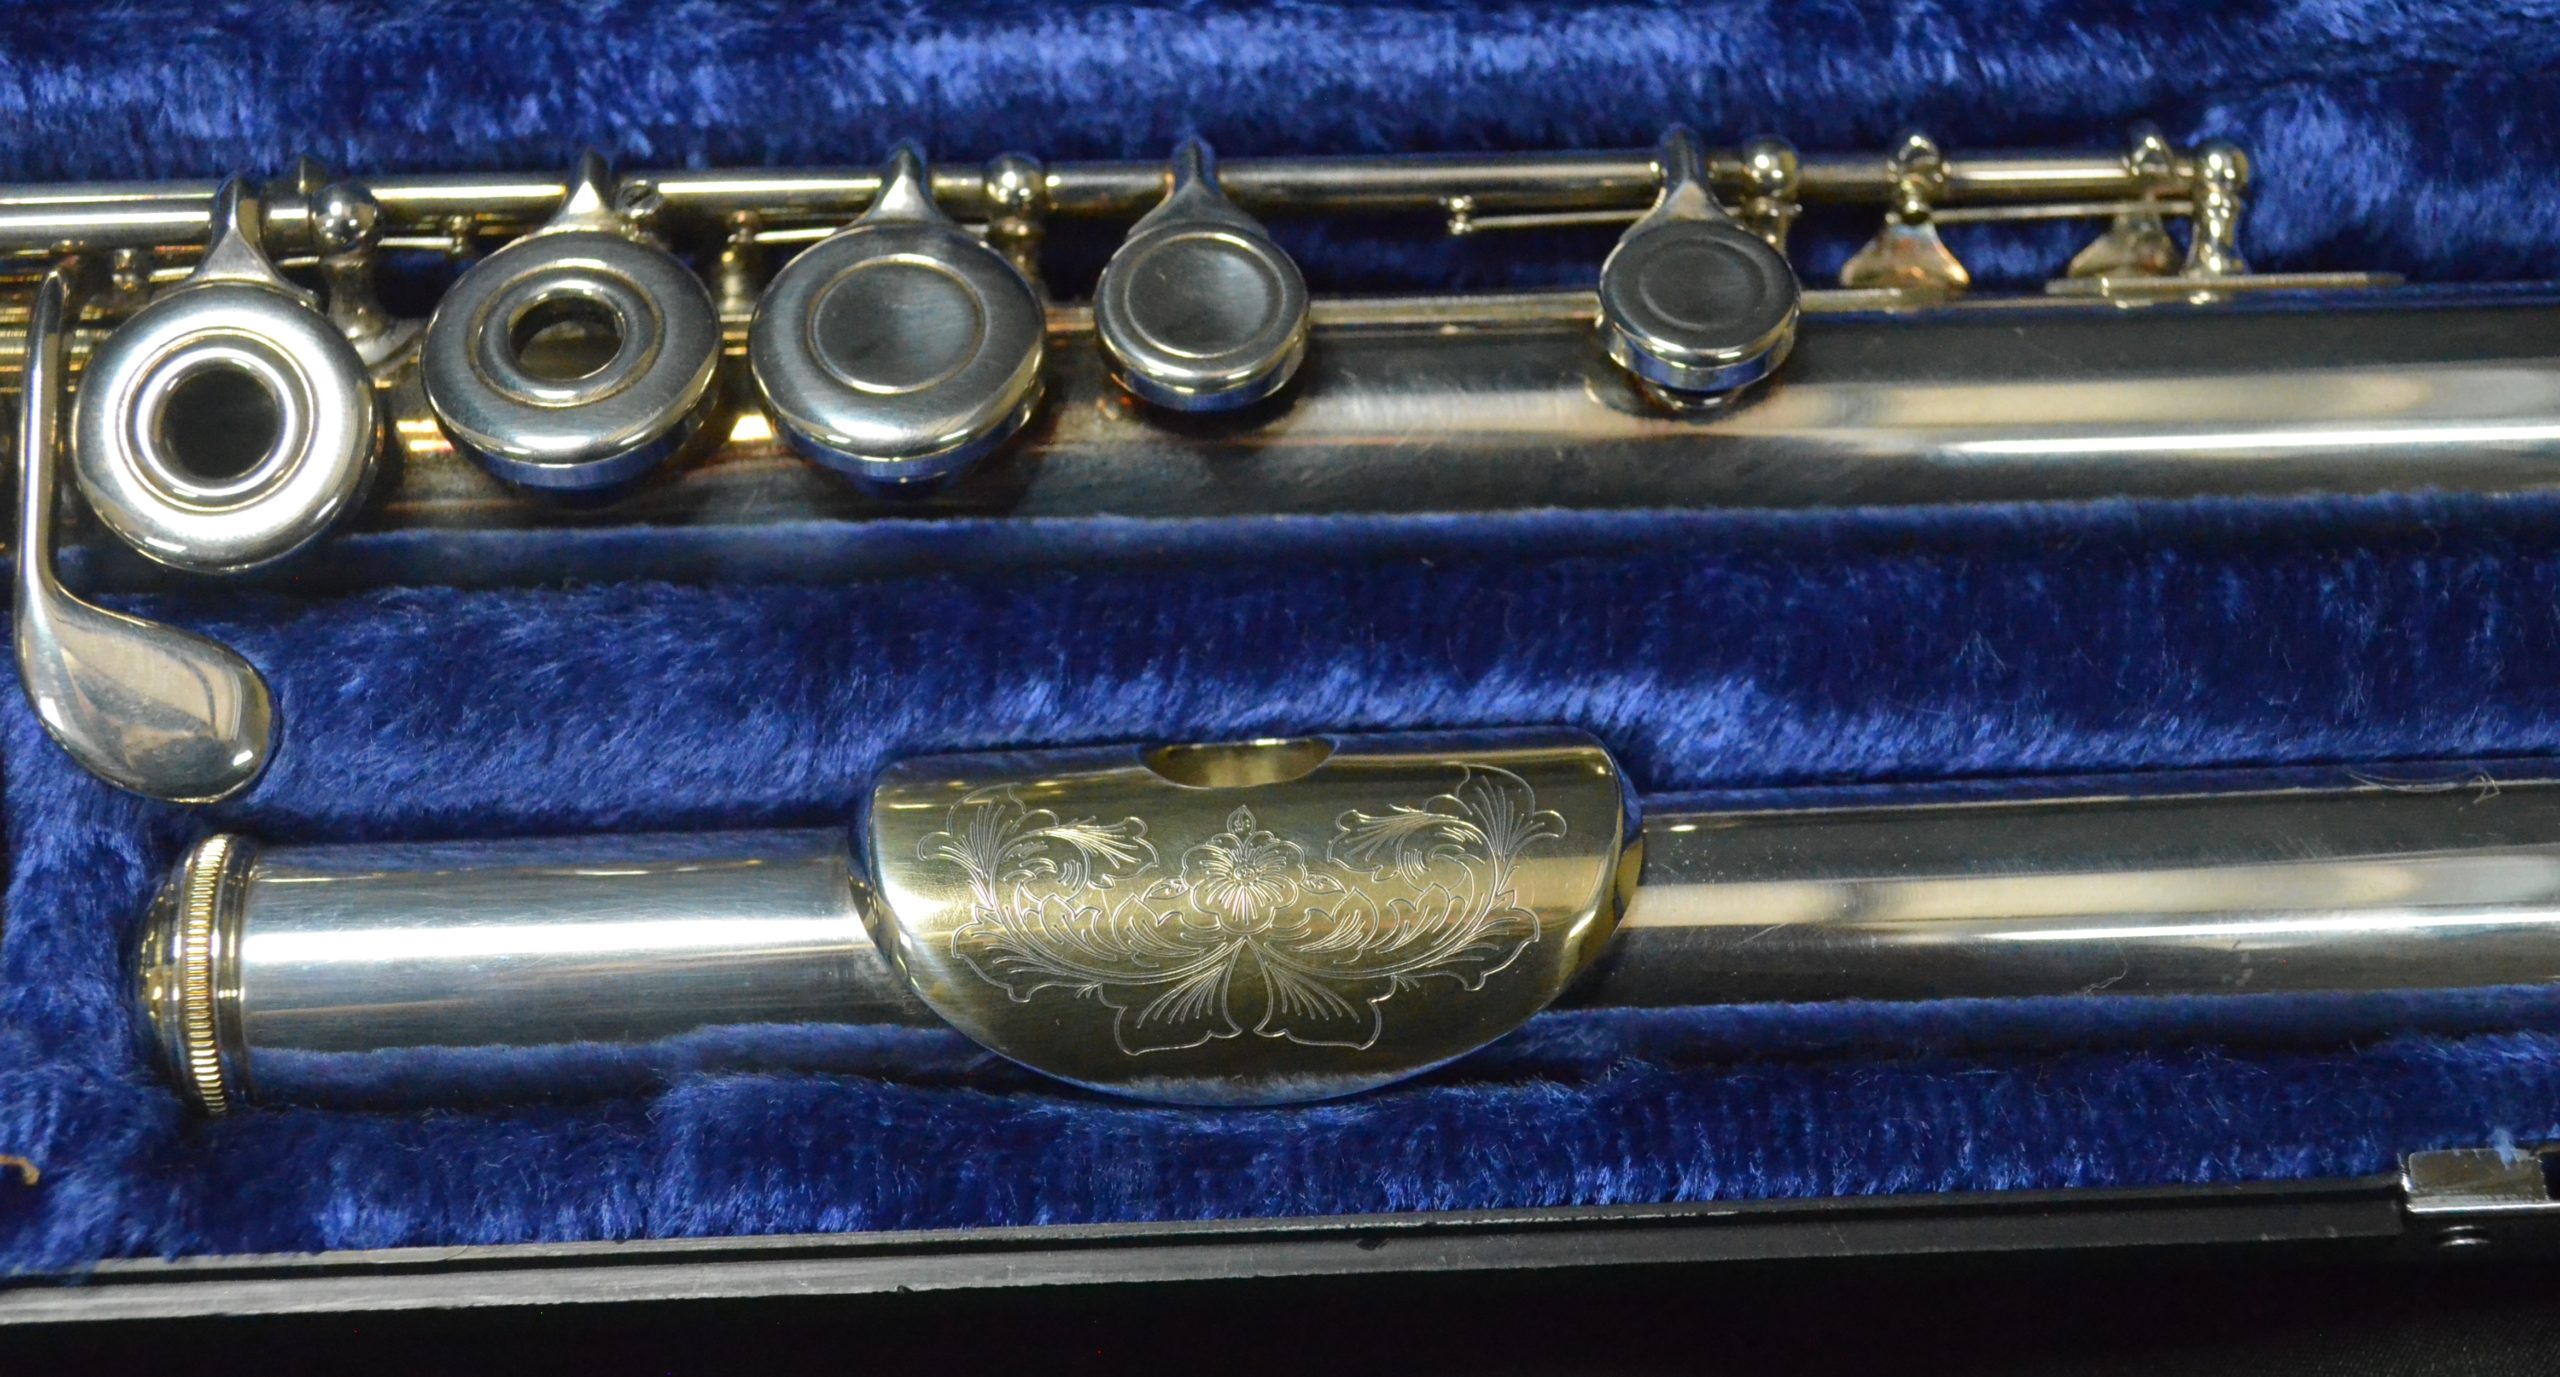 emerson flute with one open hole